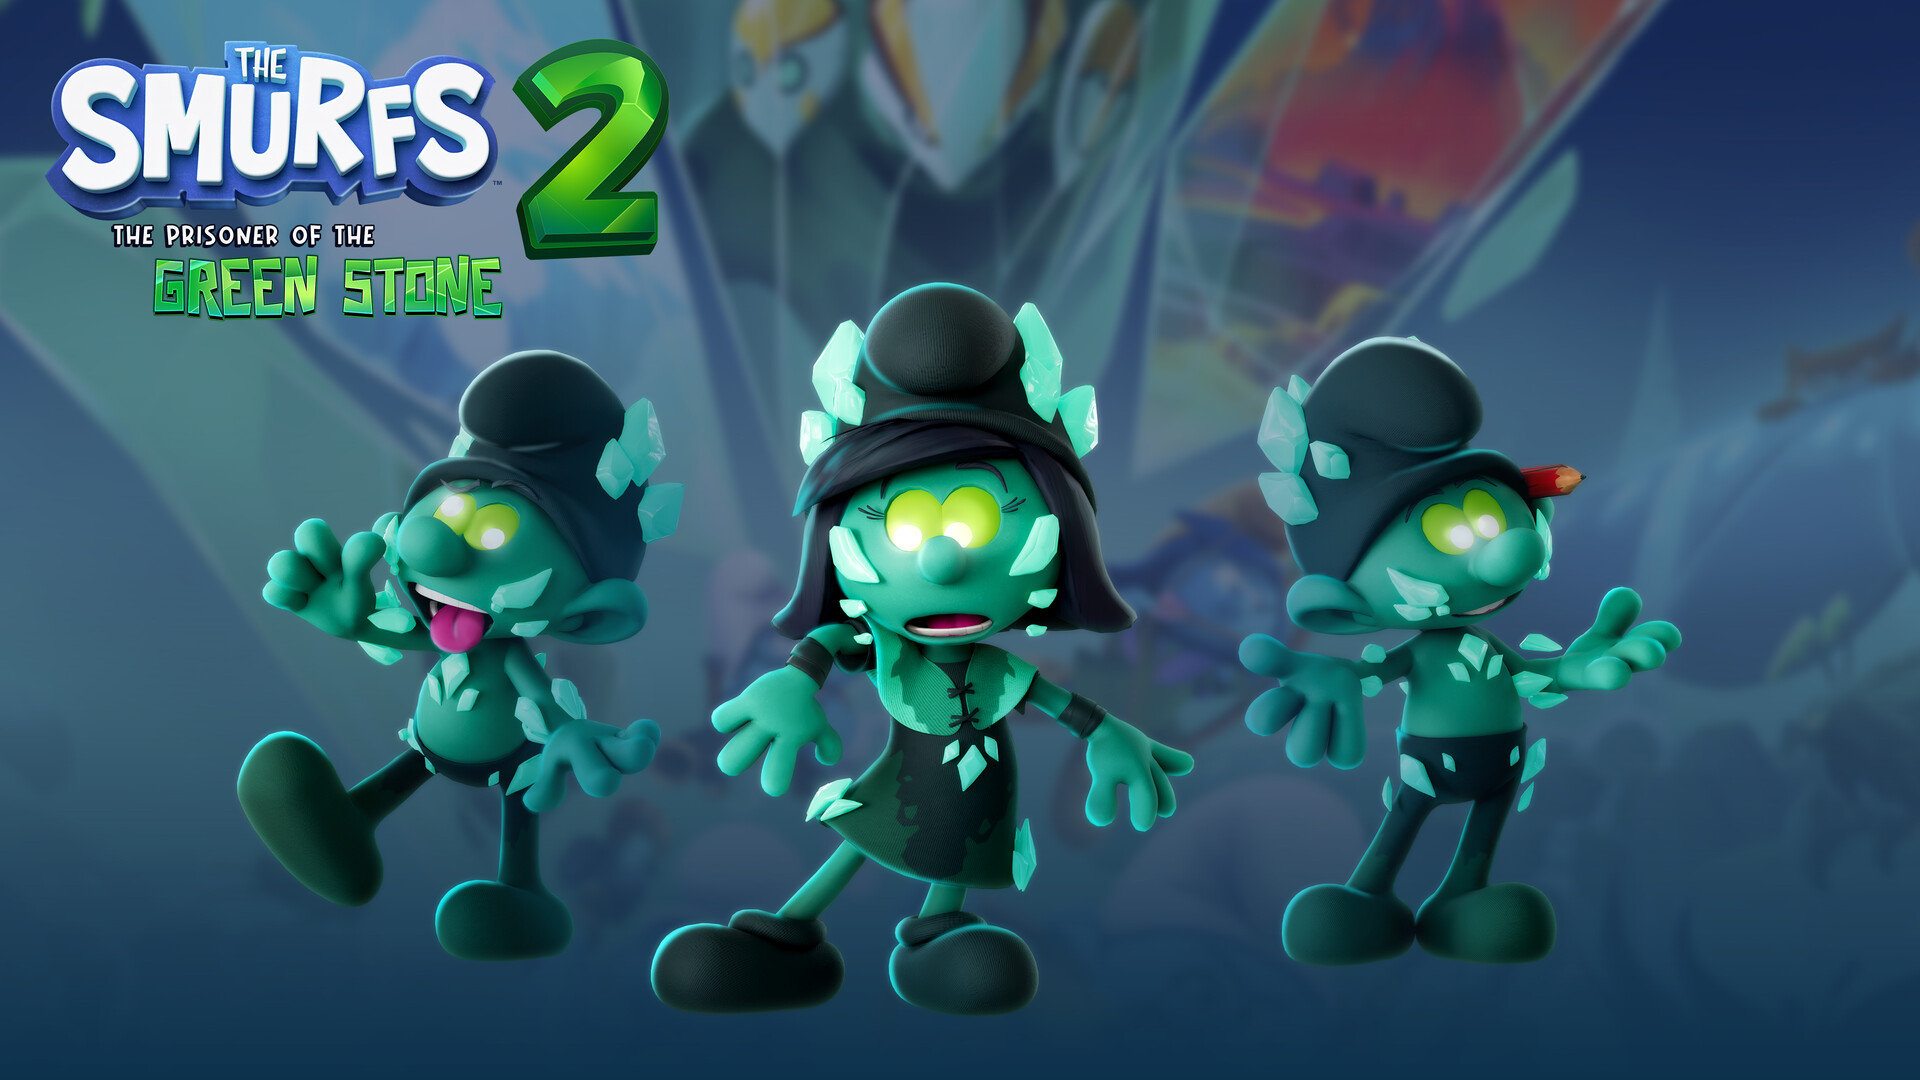 The Smurfs 2: The Prisoner of the Green Stone - Corrupted Outfit DLC GOG CD Key, $1.3